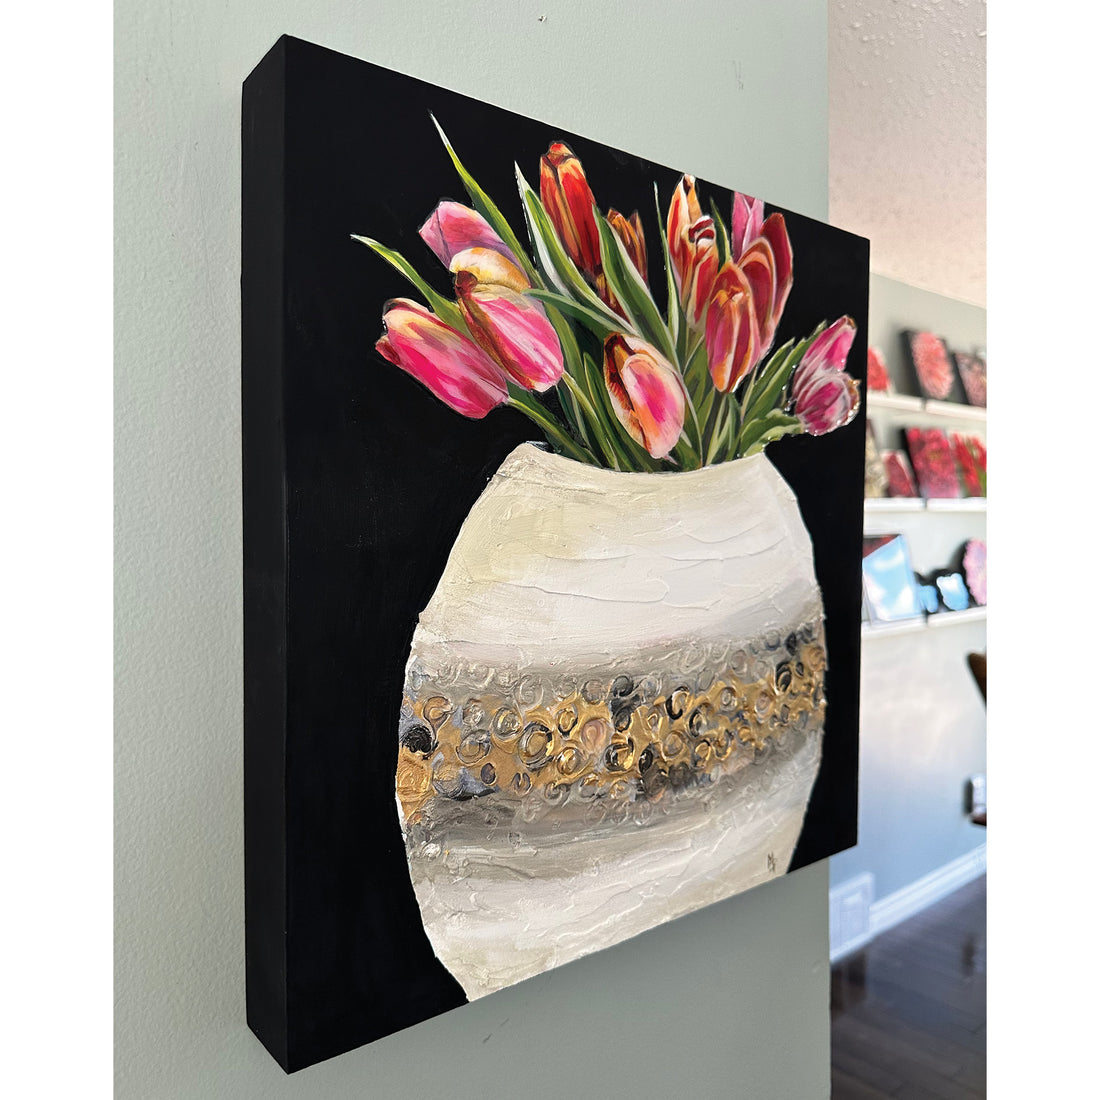 Melissa Passmore "All About The Vase" abstract painting Canadian artist